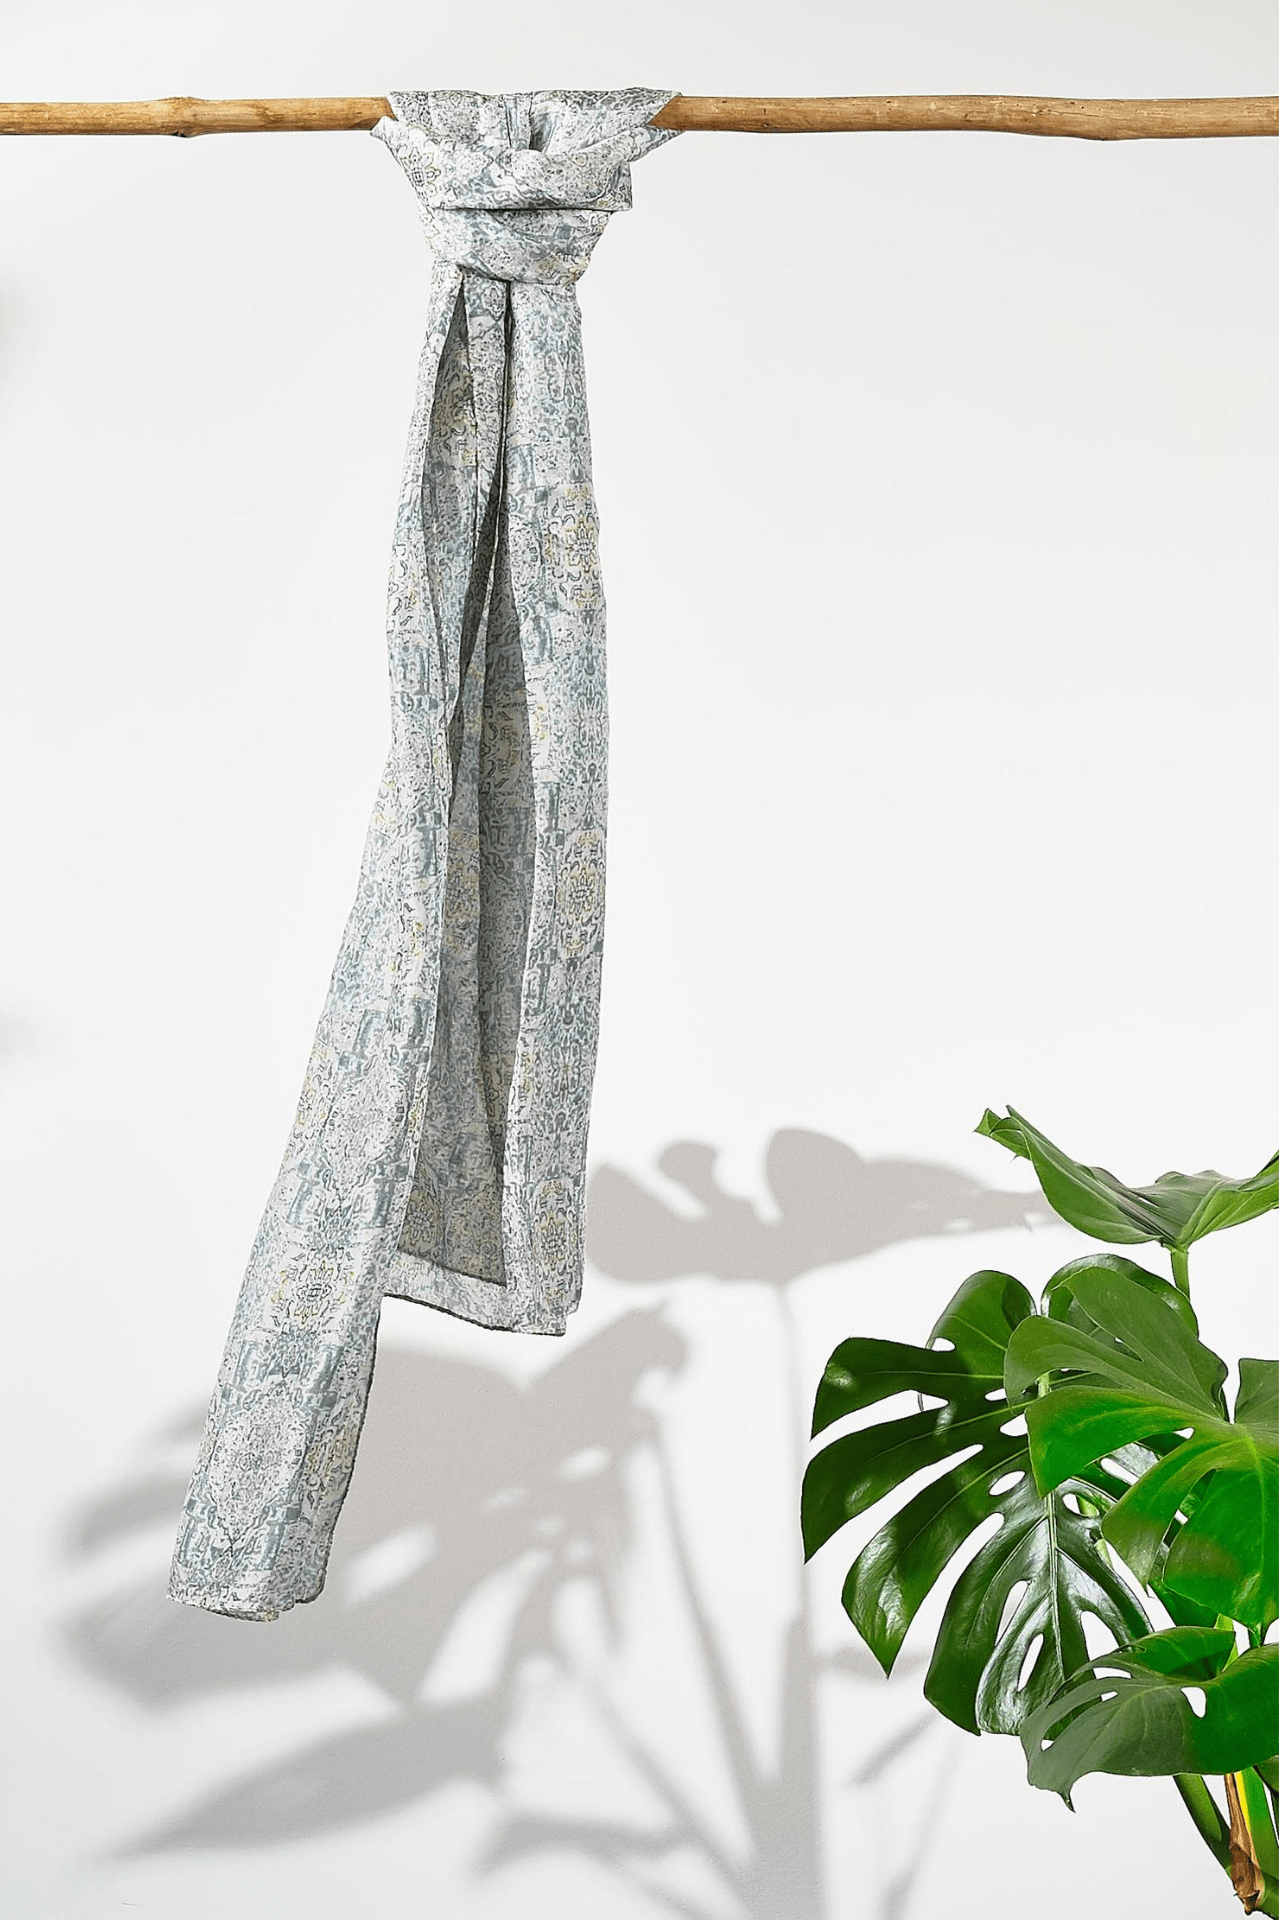 The pistachio moroccan silk scarf hanging from a rod. Showing how smooth the silk is as it hangs. The scarf is a pale grey with a deep grey-green busy pattern on it